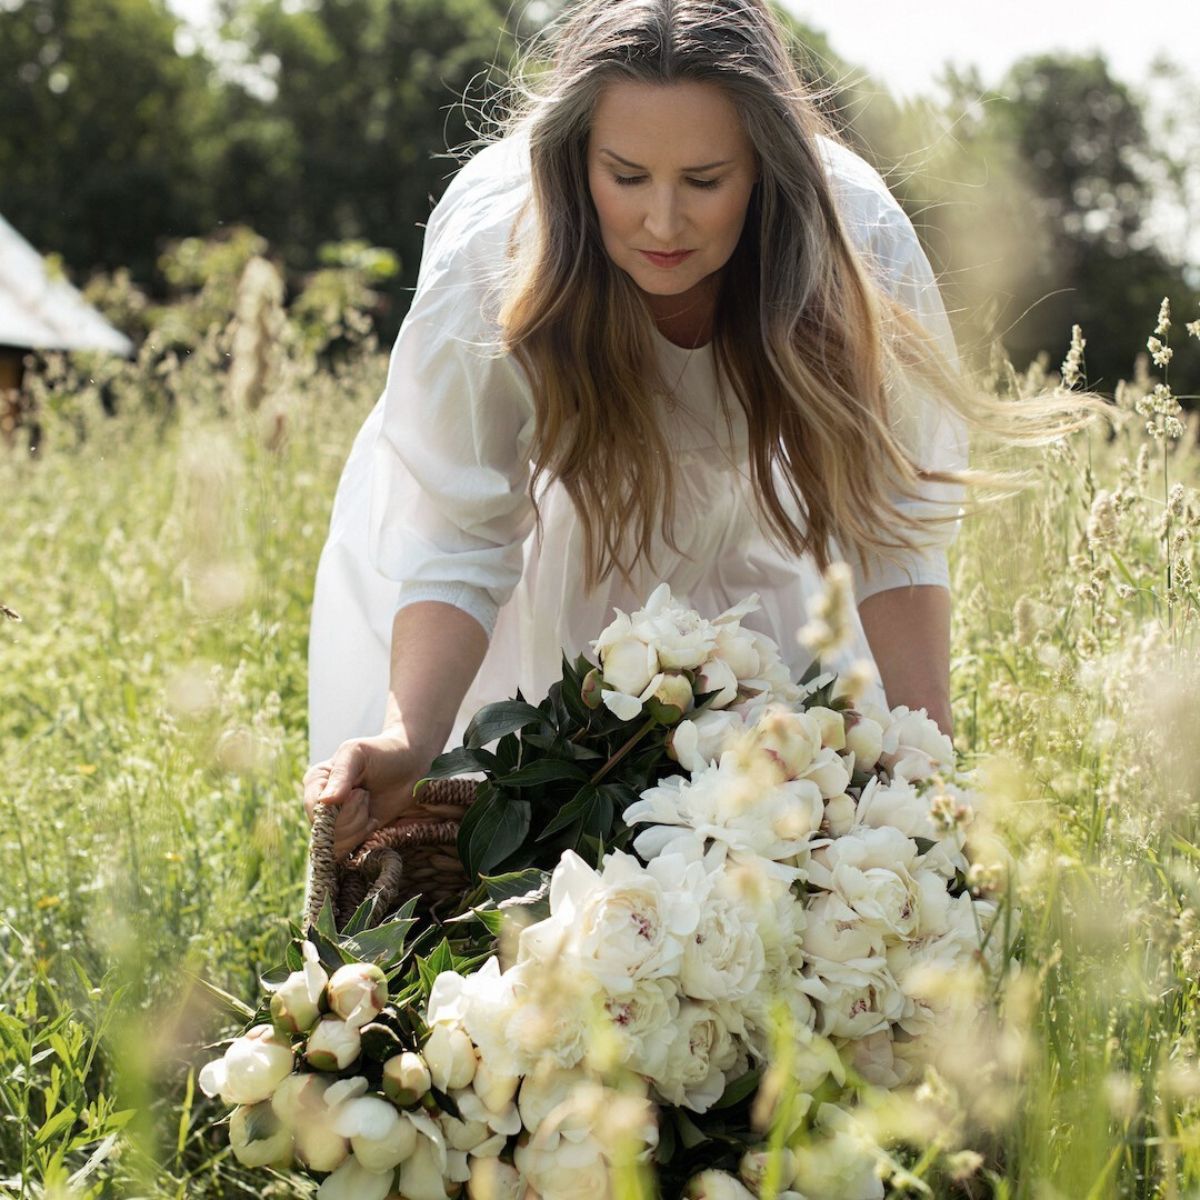 Woman picking up beautiful white peonies in field